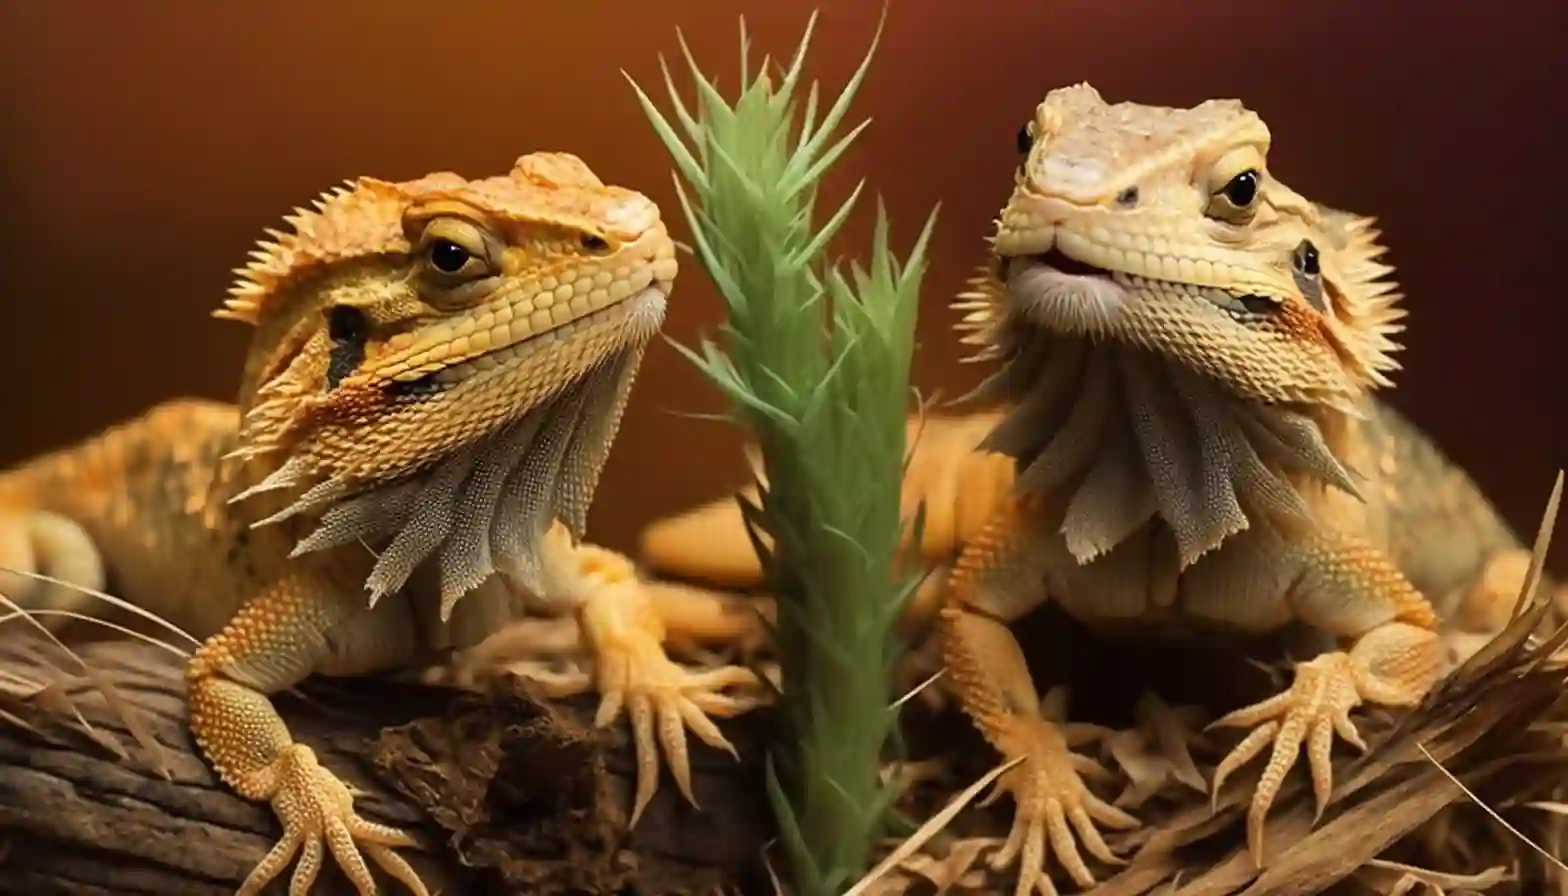 Can Bearded Dragons Eat Grass? Is It Safe?